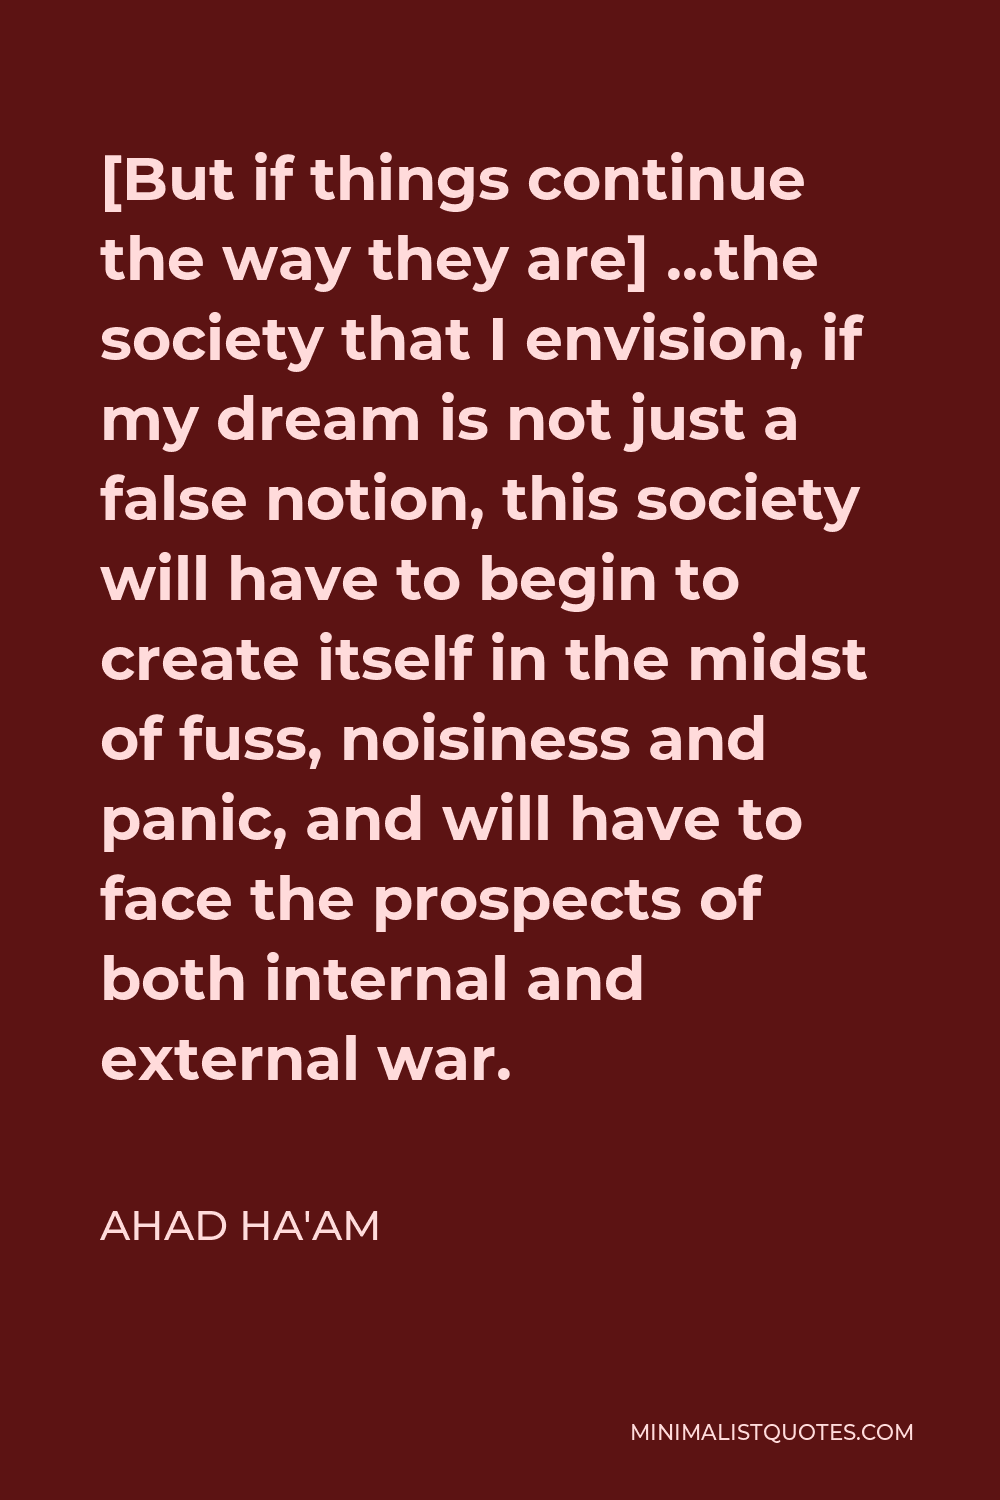 Ahad Ha'am Quote - [But if things continue the way they are] …the society that I envision, if my dream is not just a false notion, this society will have to begin to create itself in the midst of fuss, noisiness and panic, and will have to face the prospects of both internal and external war.